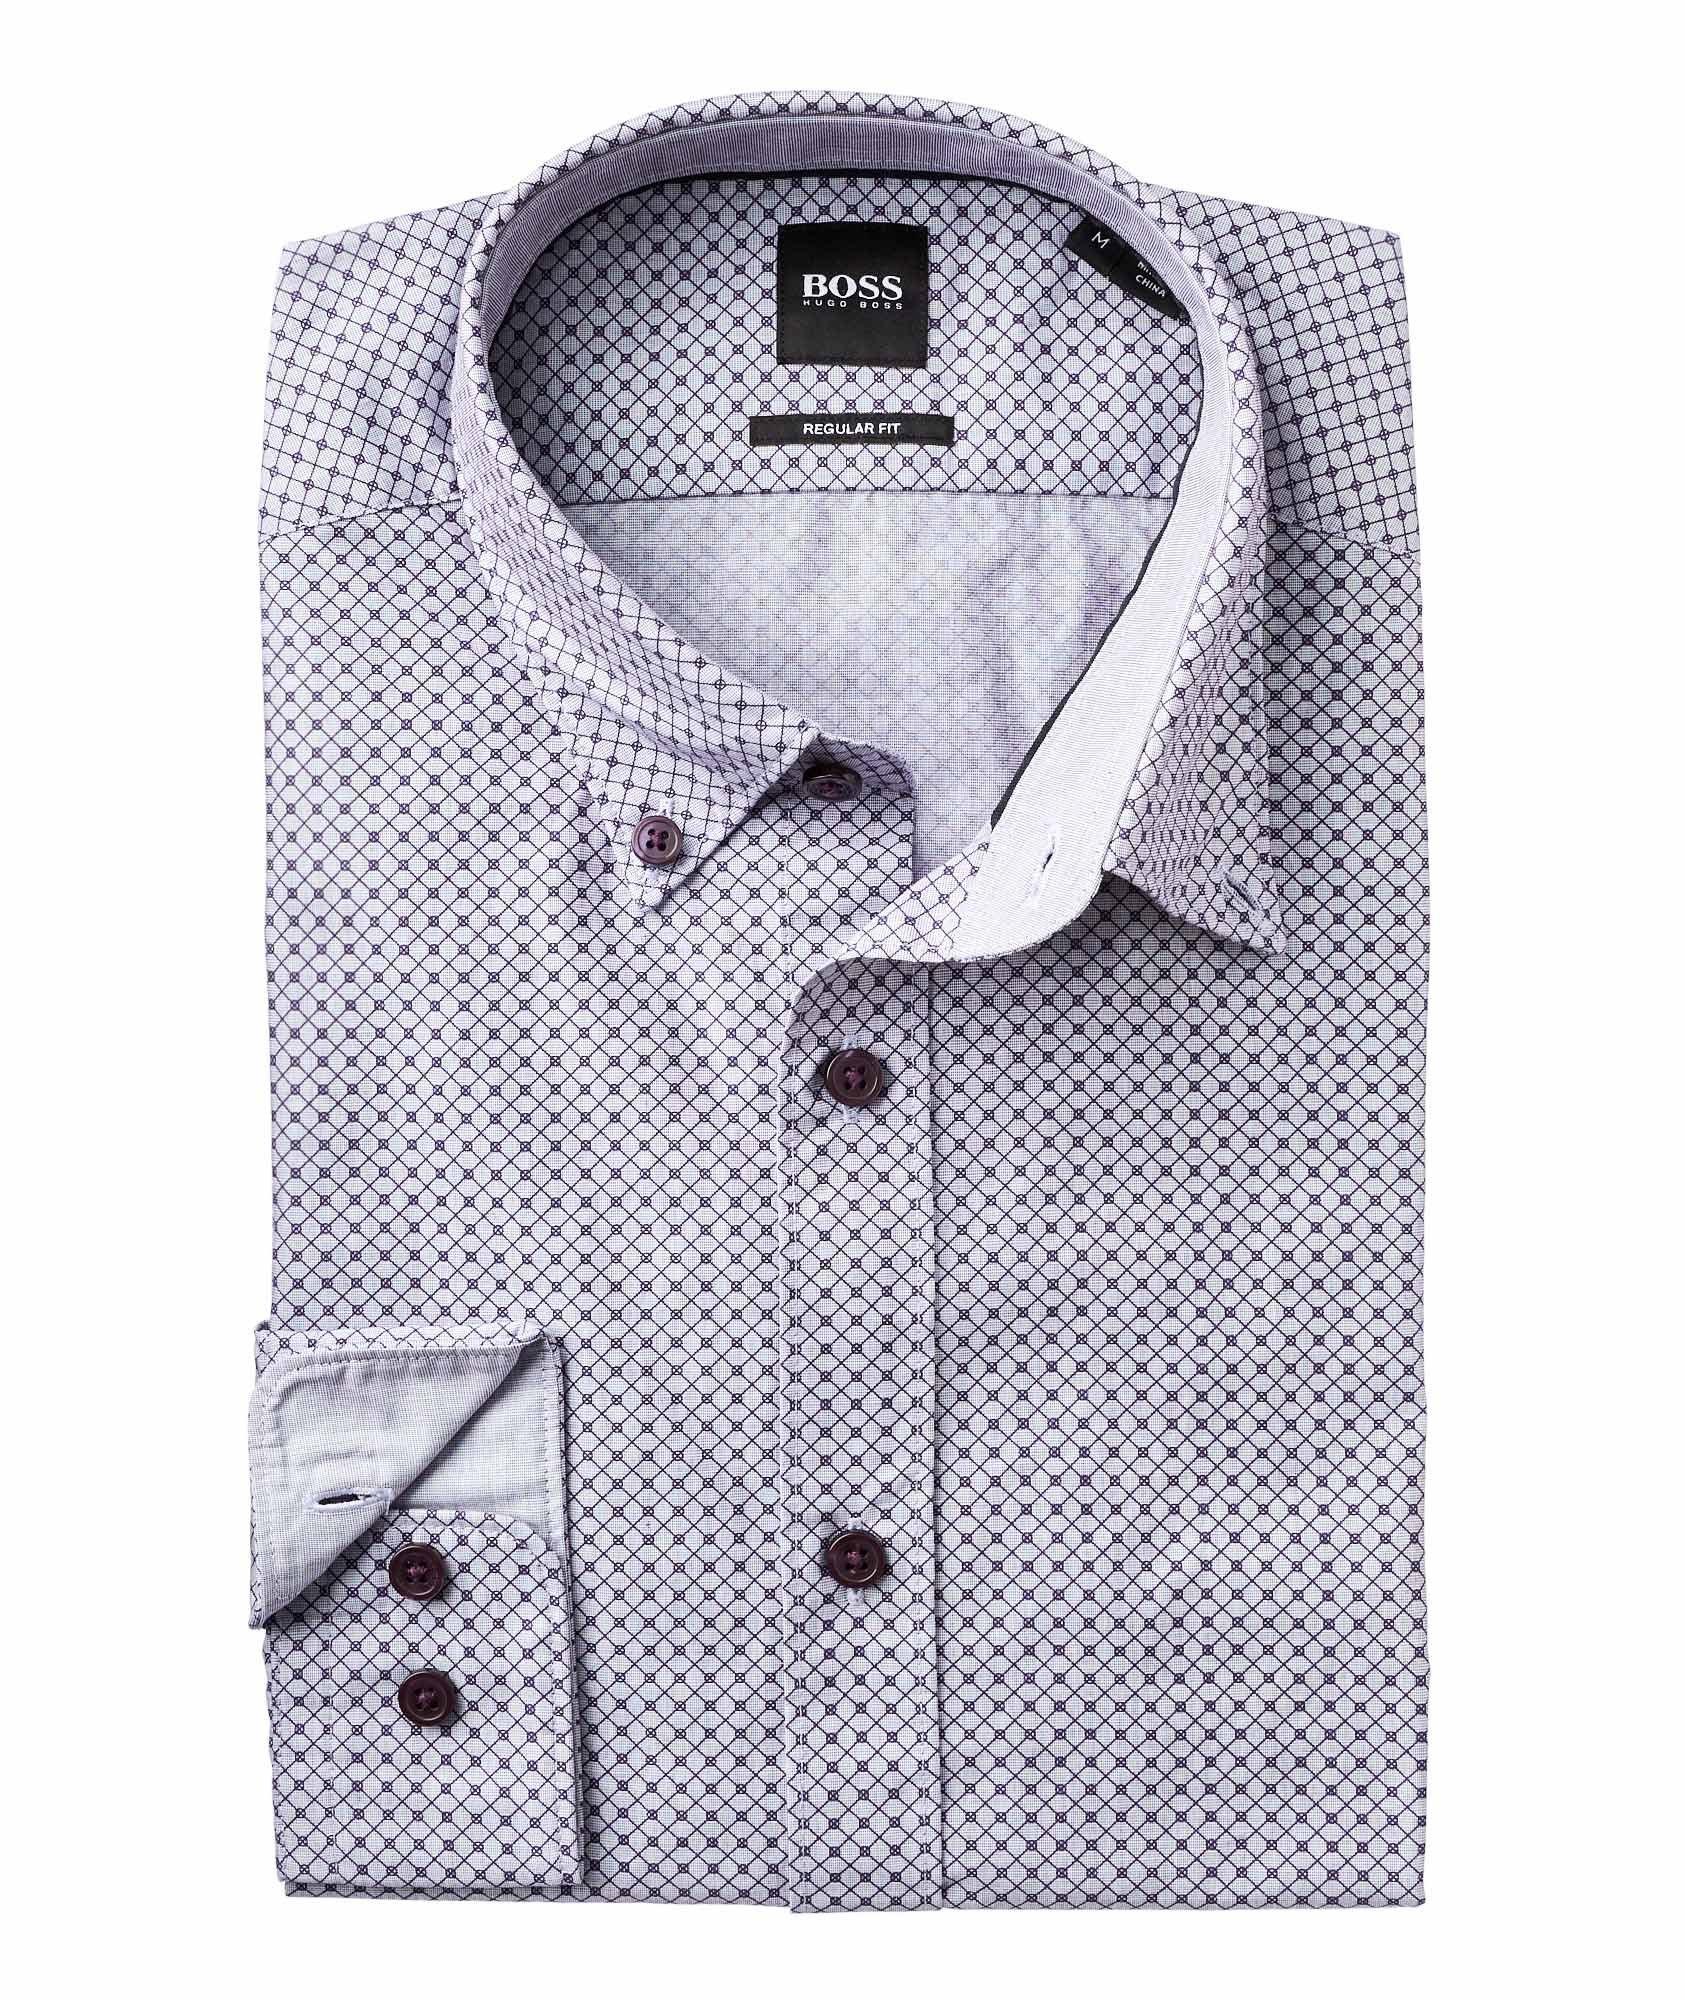 Contemporary Fit Neat-Printed Cotton Shirt image 1